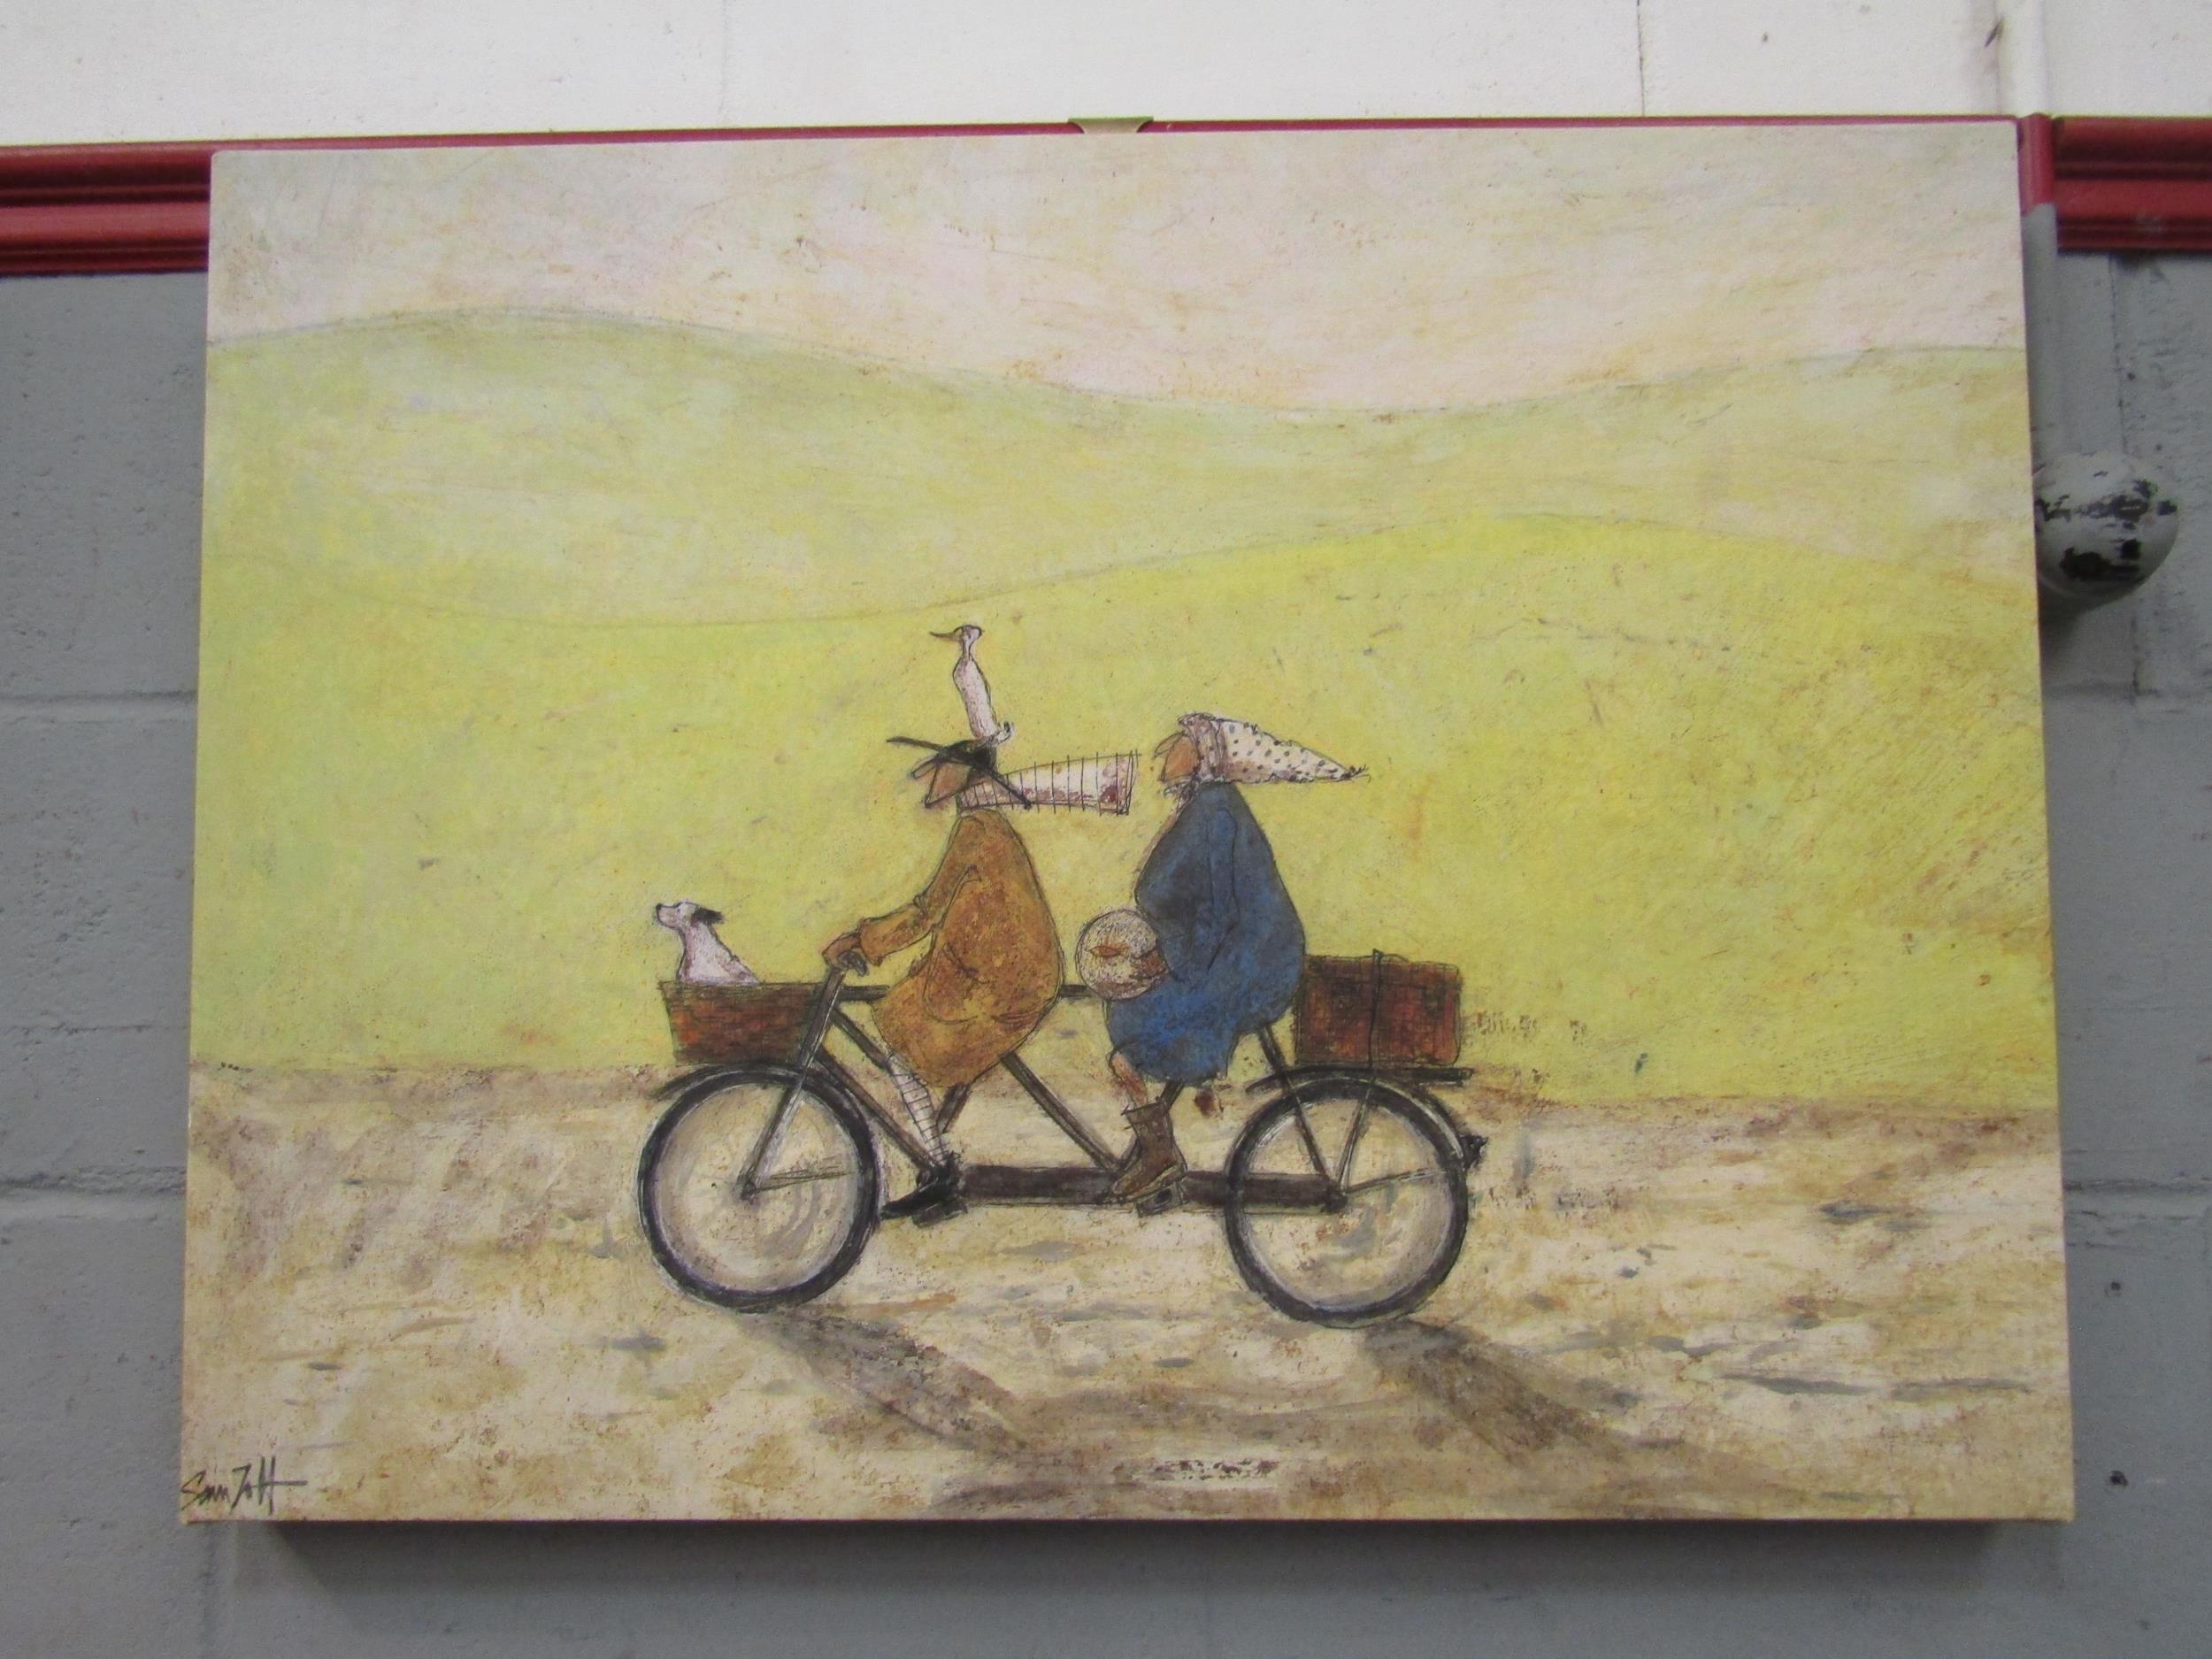 A Sam Toft canvas entitled "Grand Day Out", 60cm x 80cm